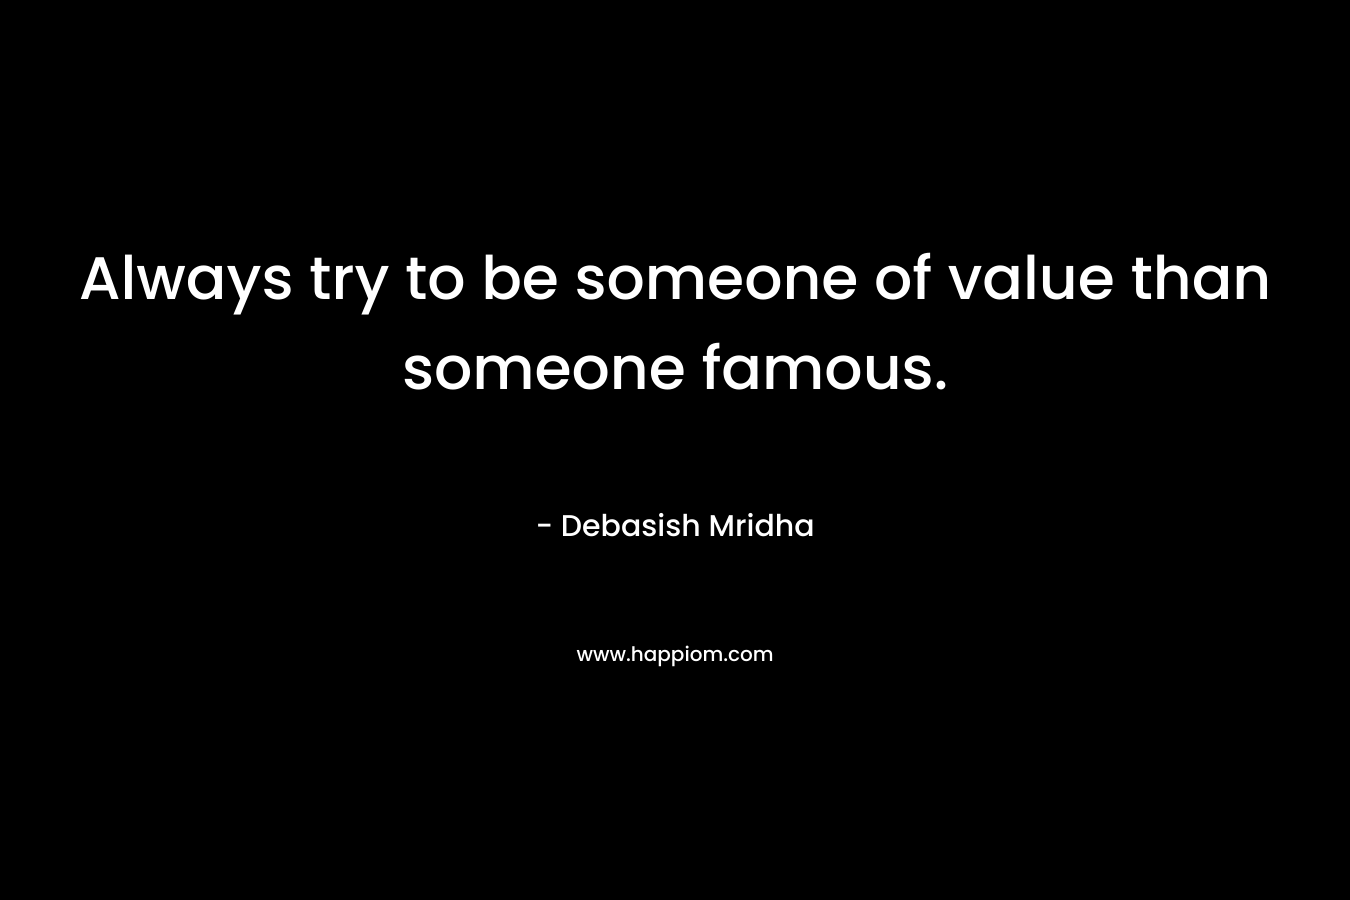 Always try to be someone of value than someone famous.